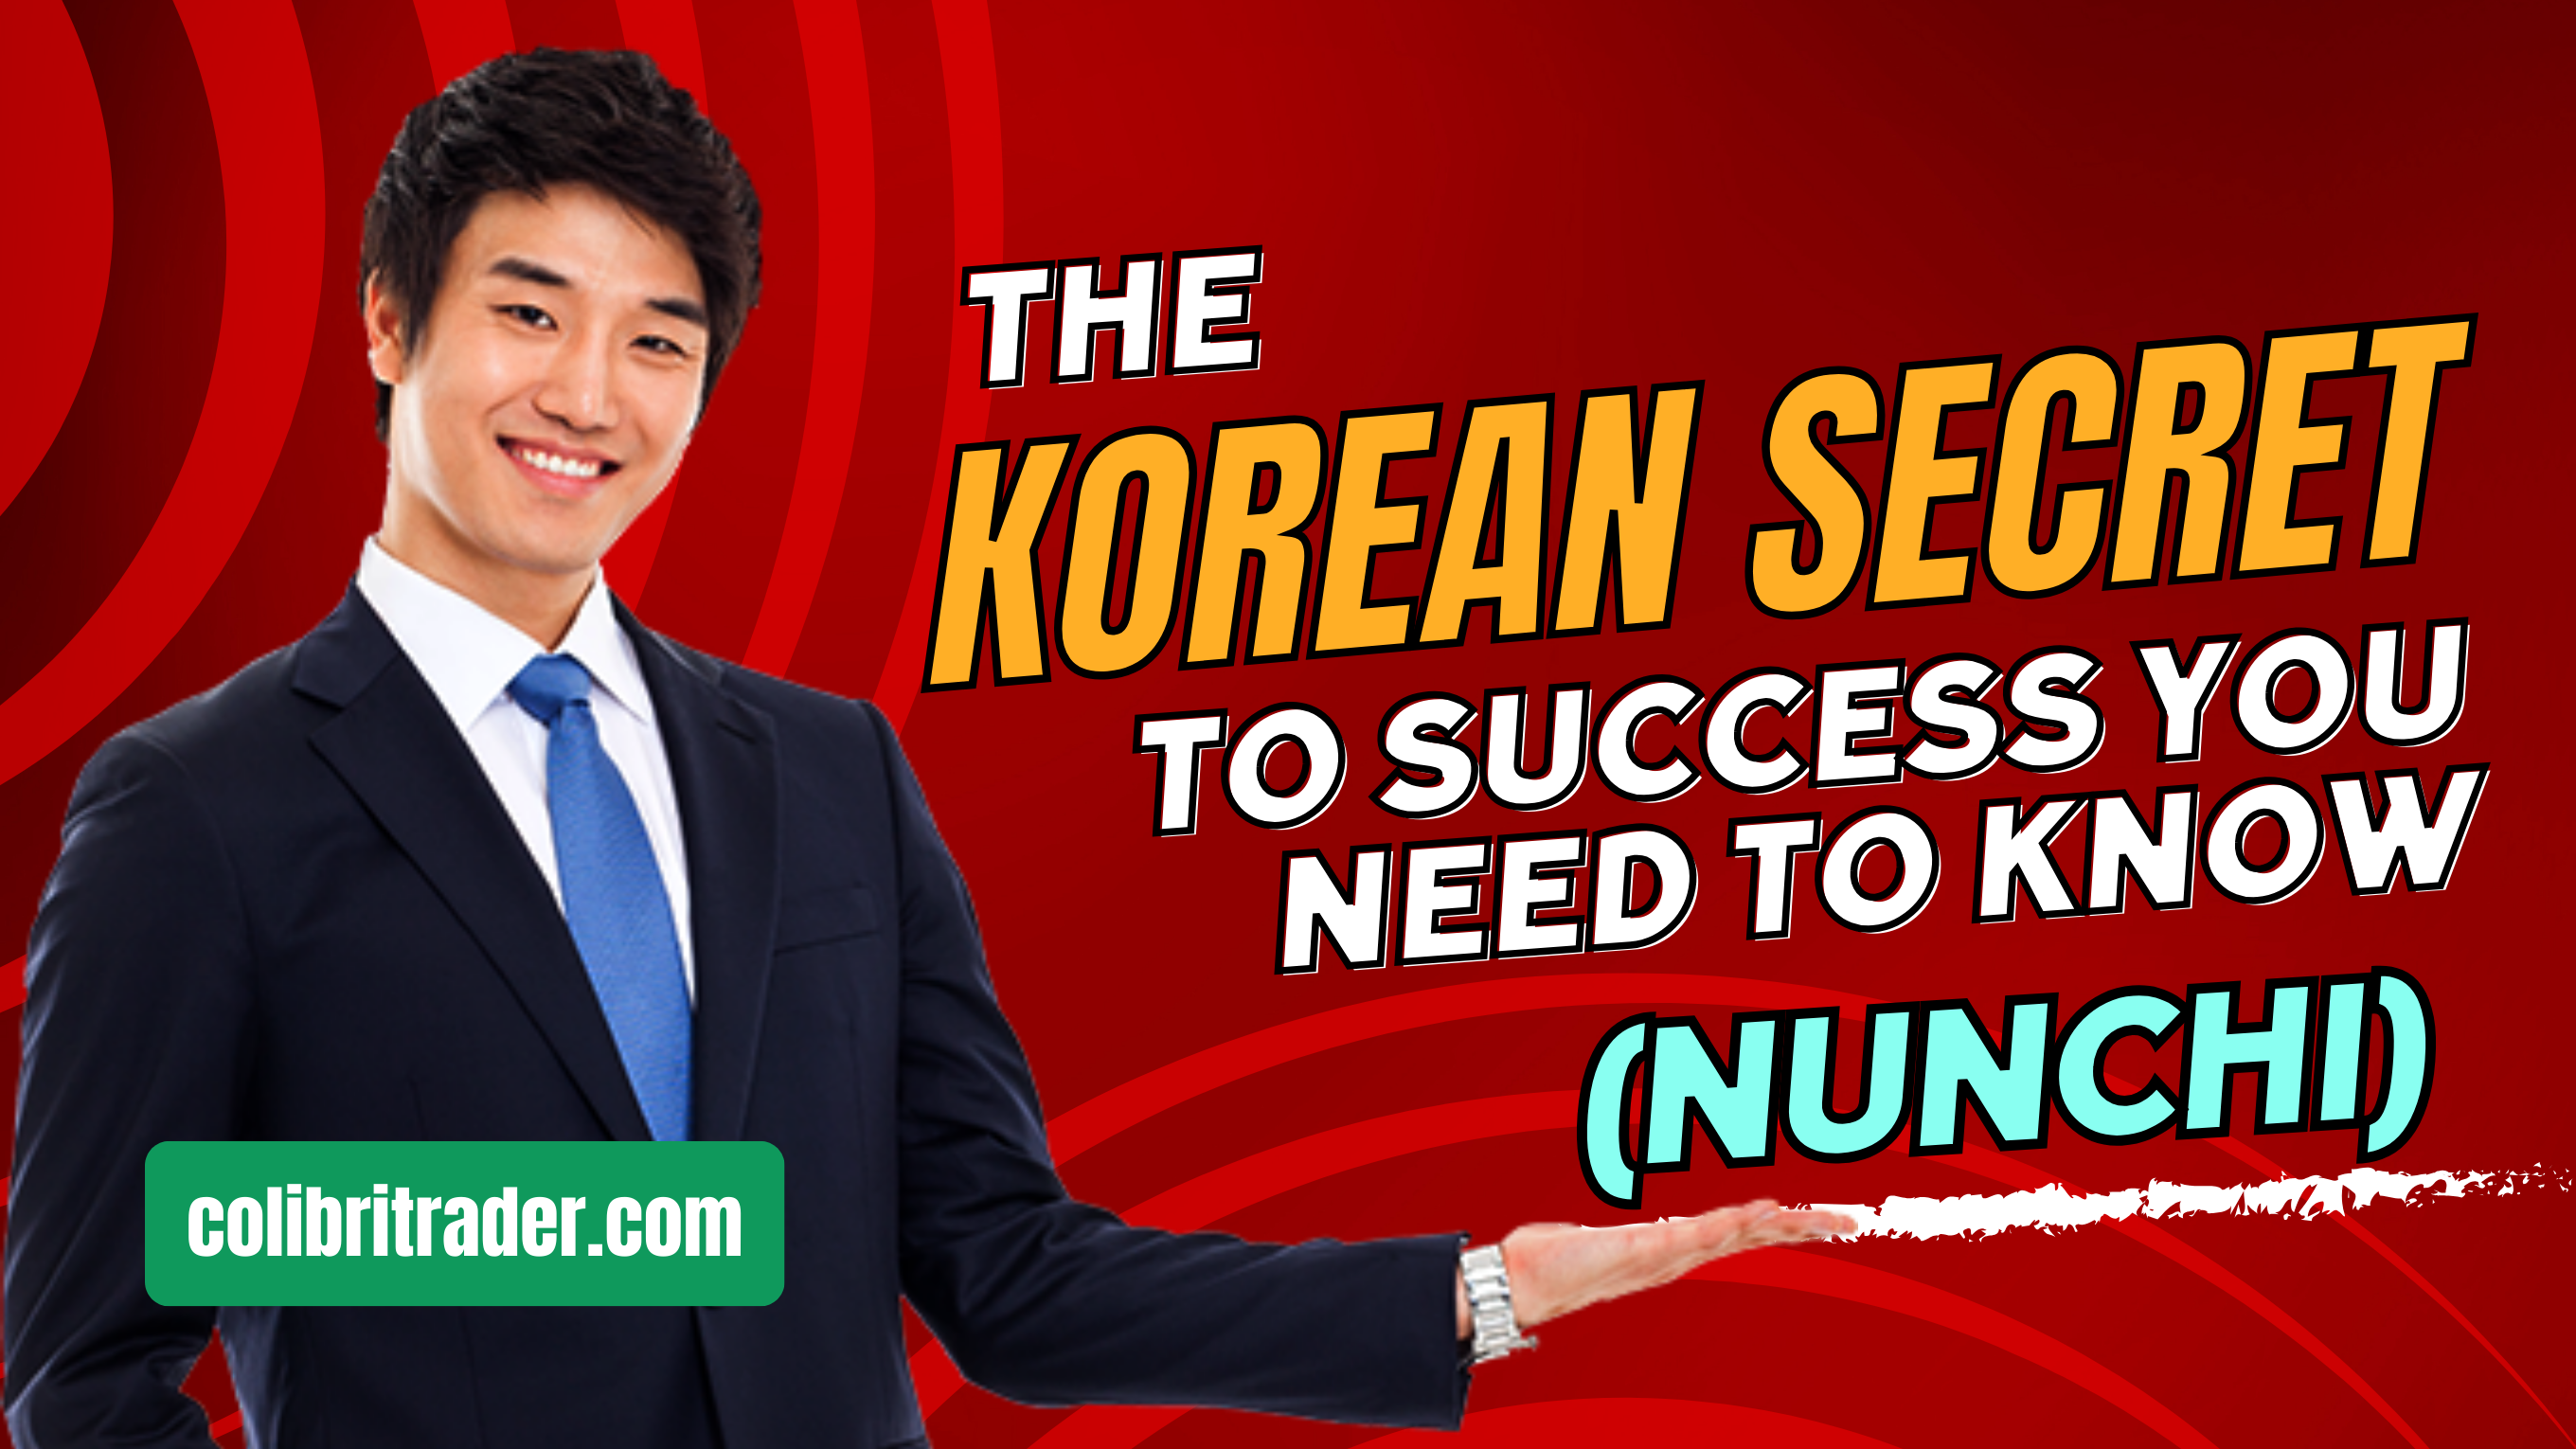 The Korean Secret to Success You Need to Know (Nunchi)